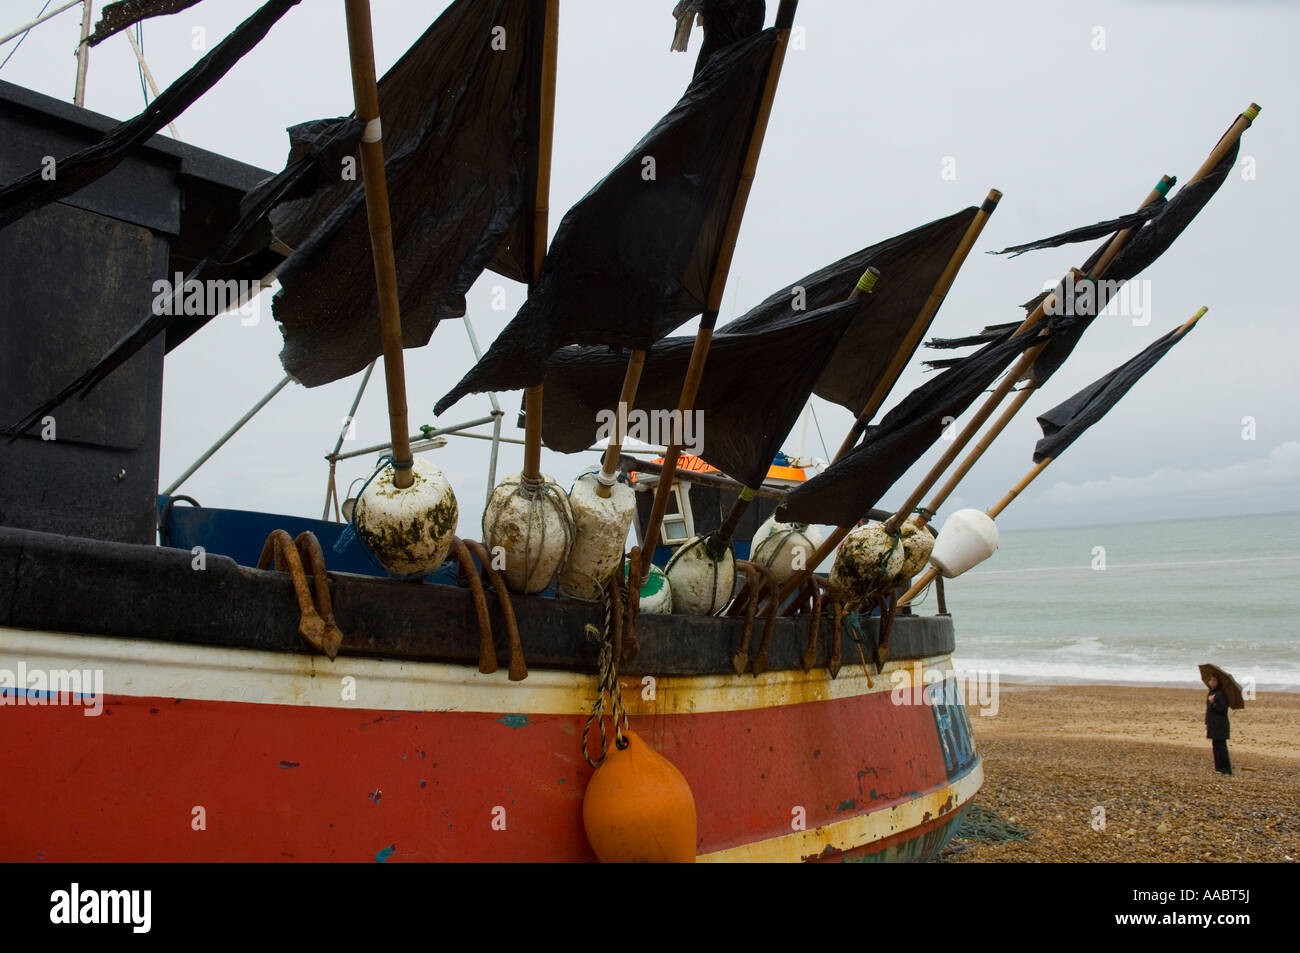 Fishing boat with black flags on the beach on a rainy day, Hastings Stock  Photo - Alamy